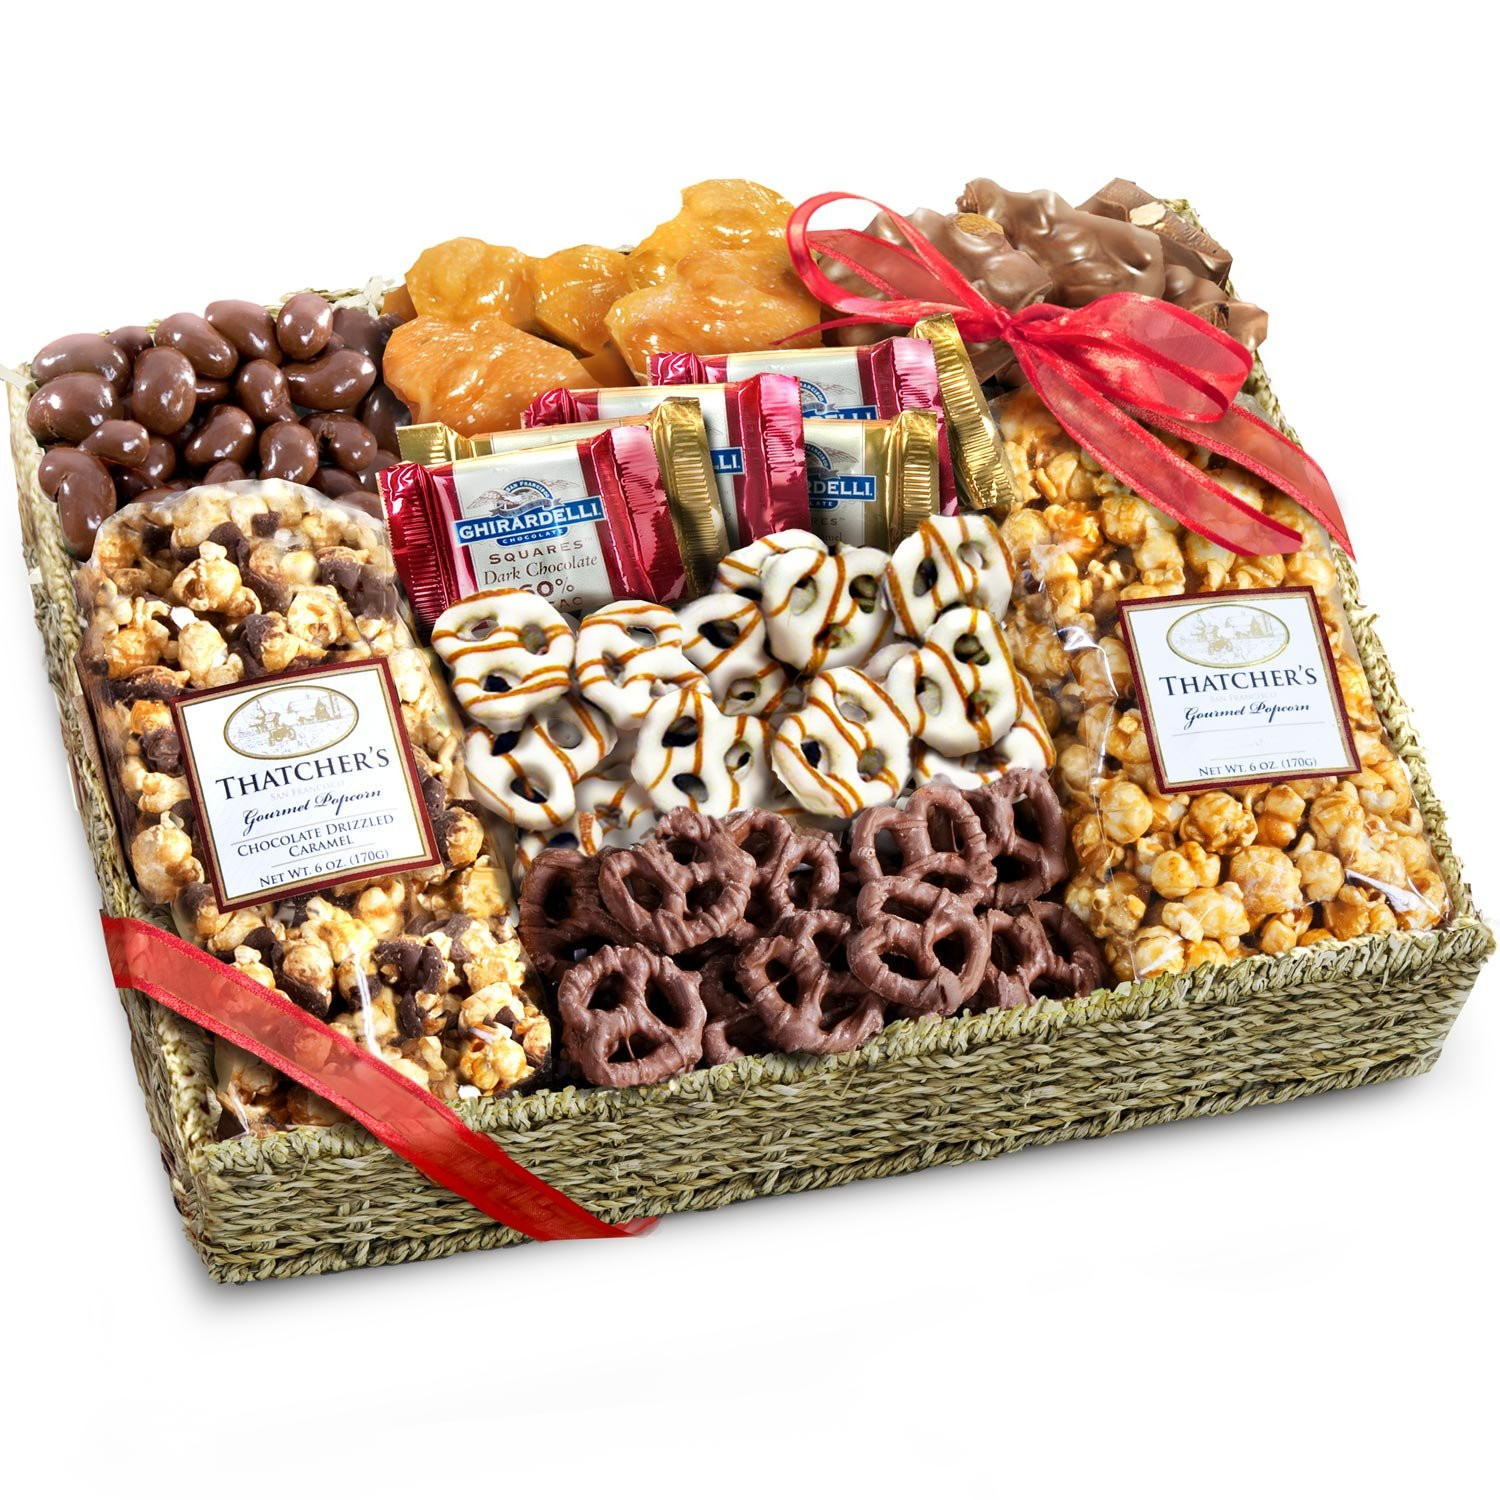 Gift Basket Ideas For Parents
 Gift Ideas for Boyfriends Parents Gift Ideas for